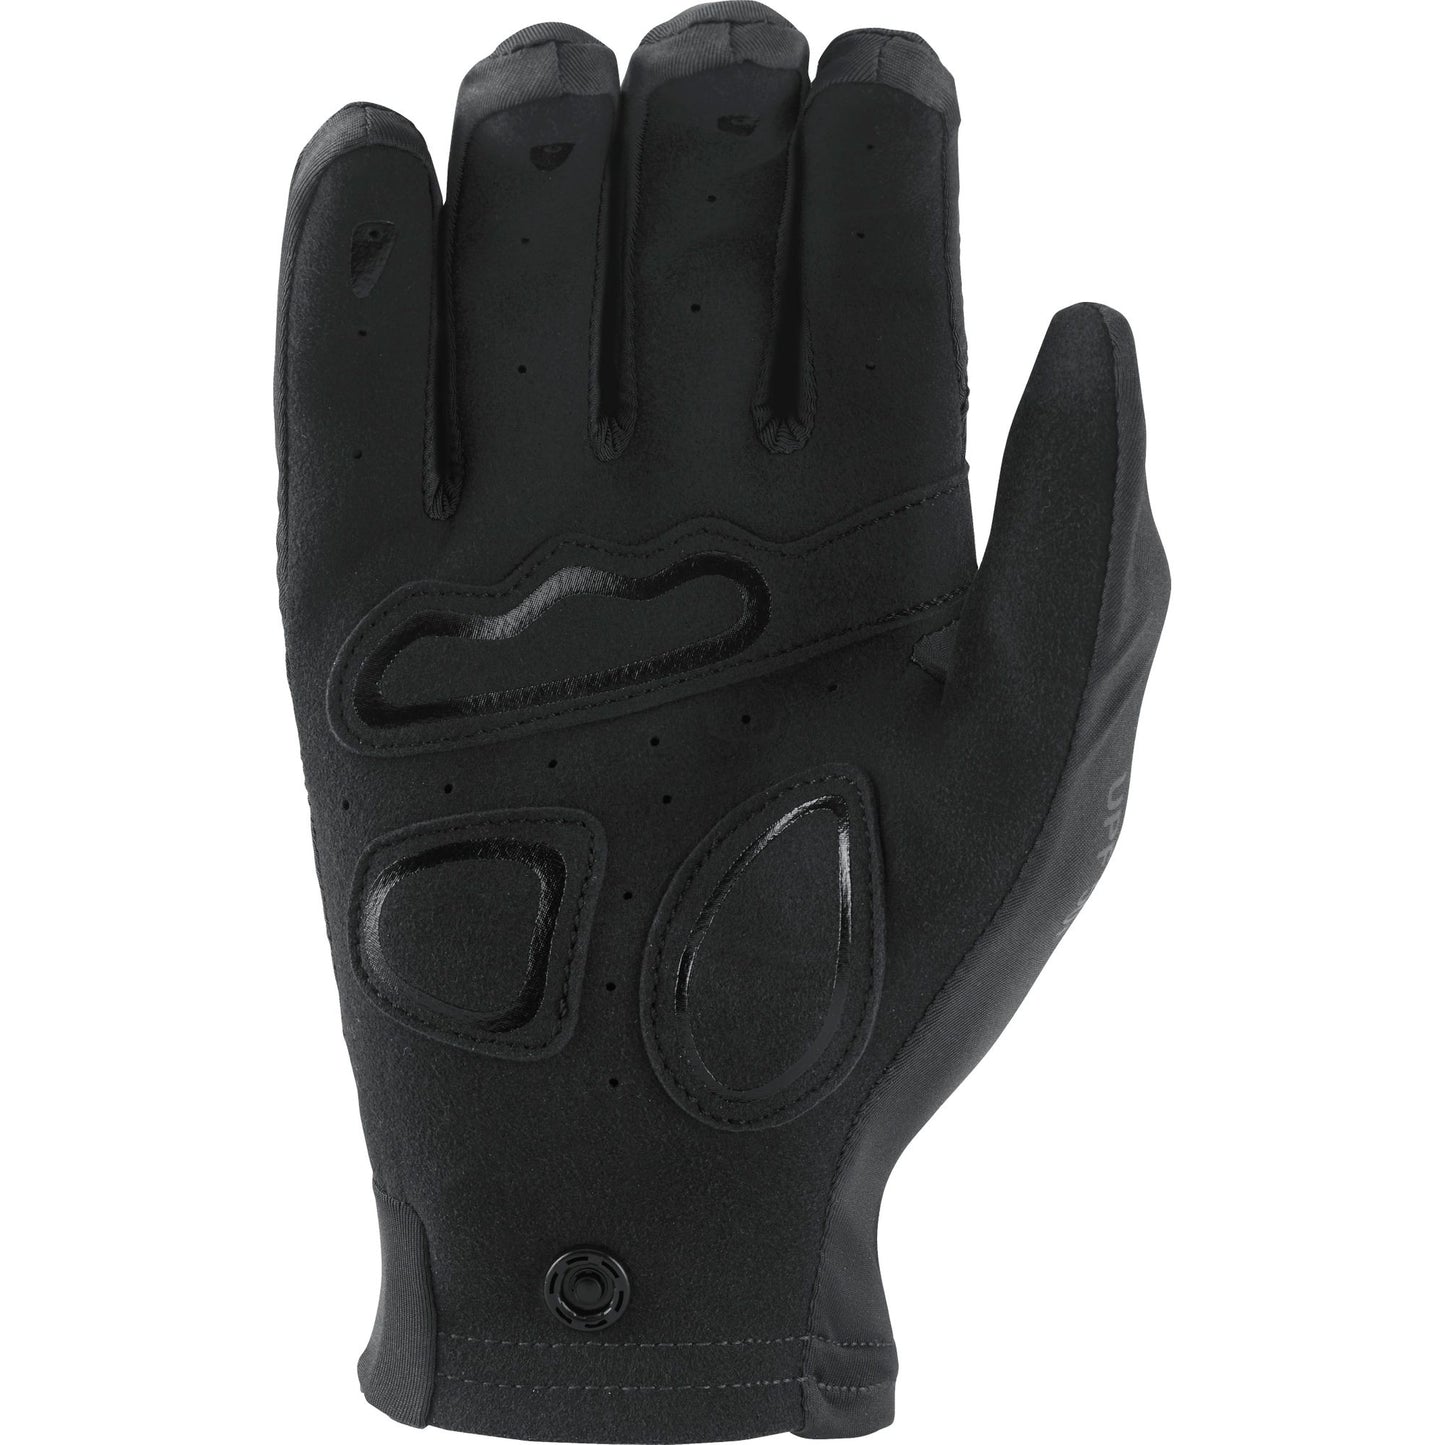 A pair of Cove Gloves by NRS with a synthetic leather palm for added protection.